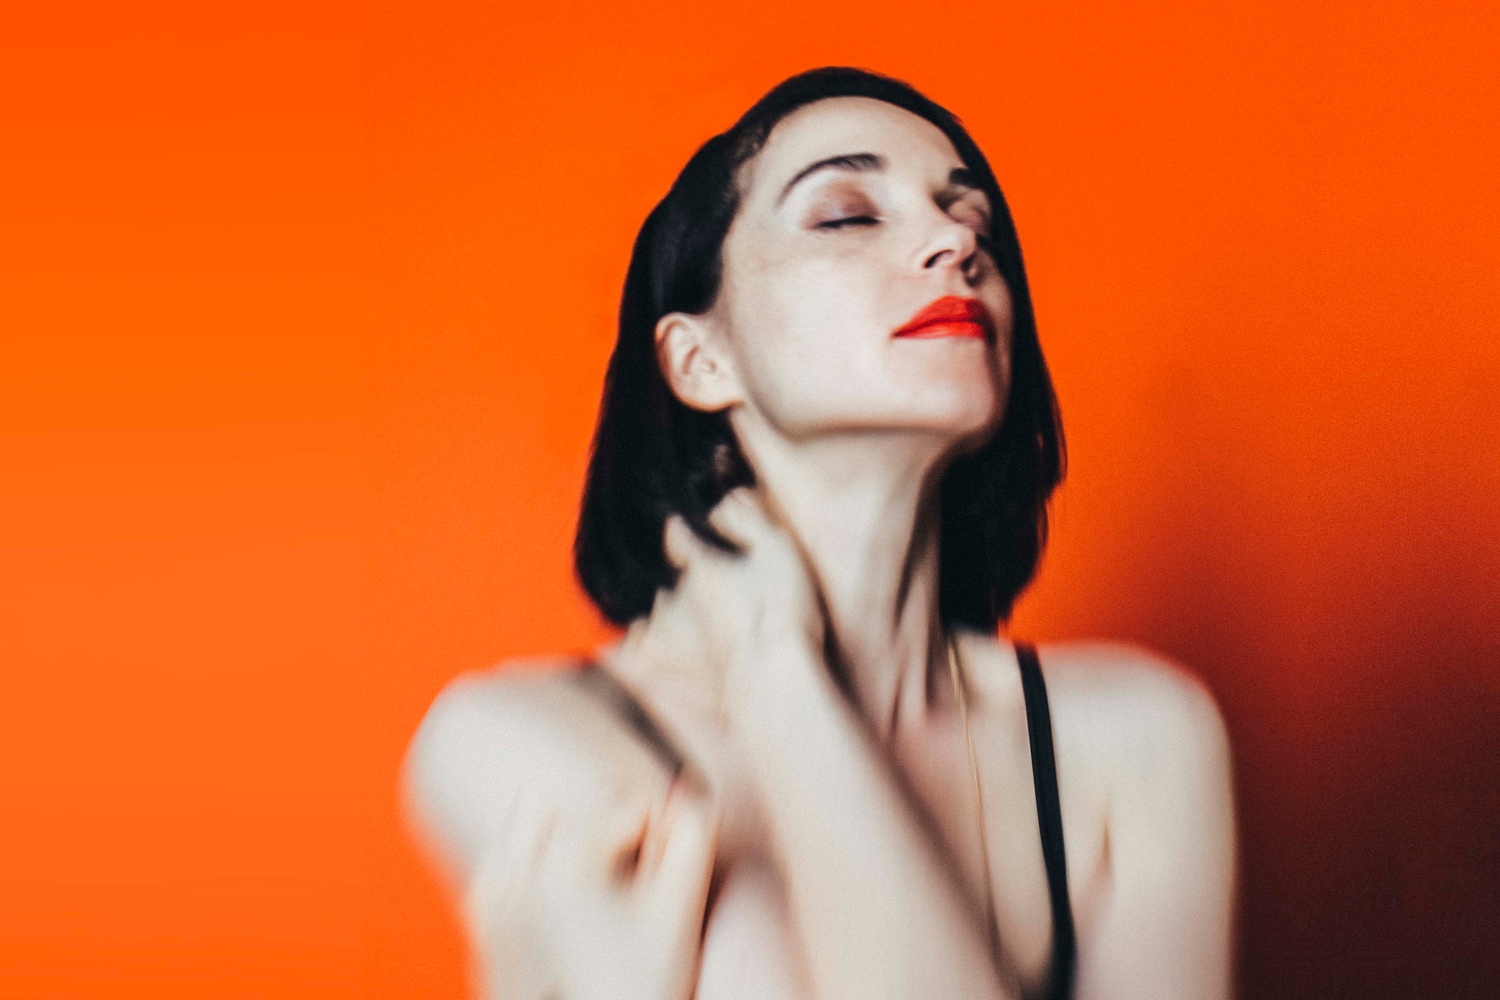 St. Vincent to release a new album next year